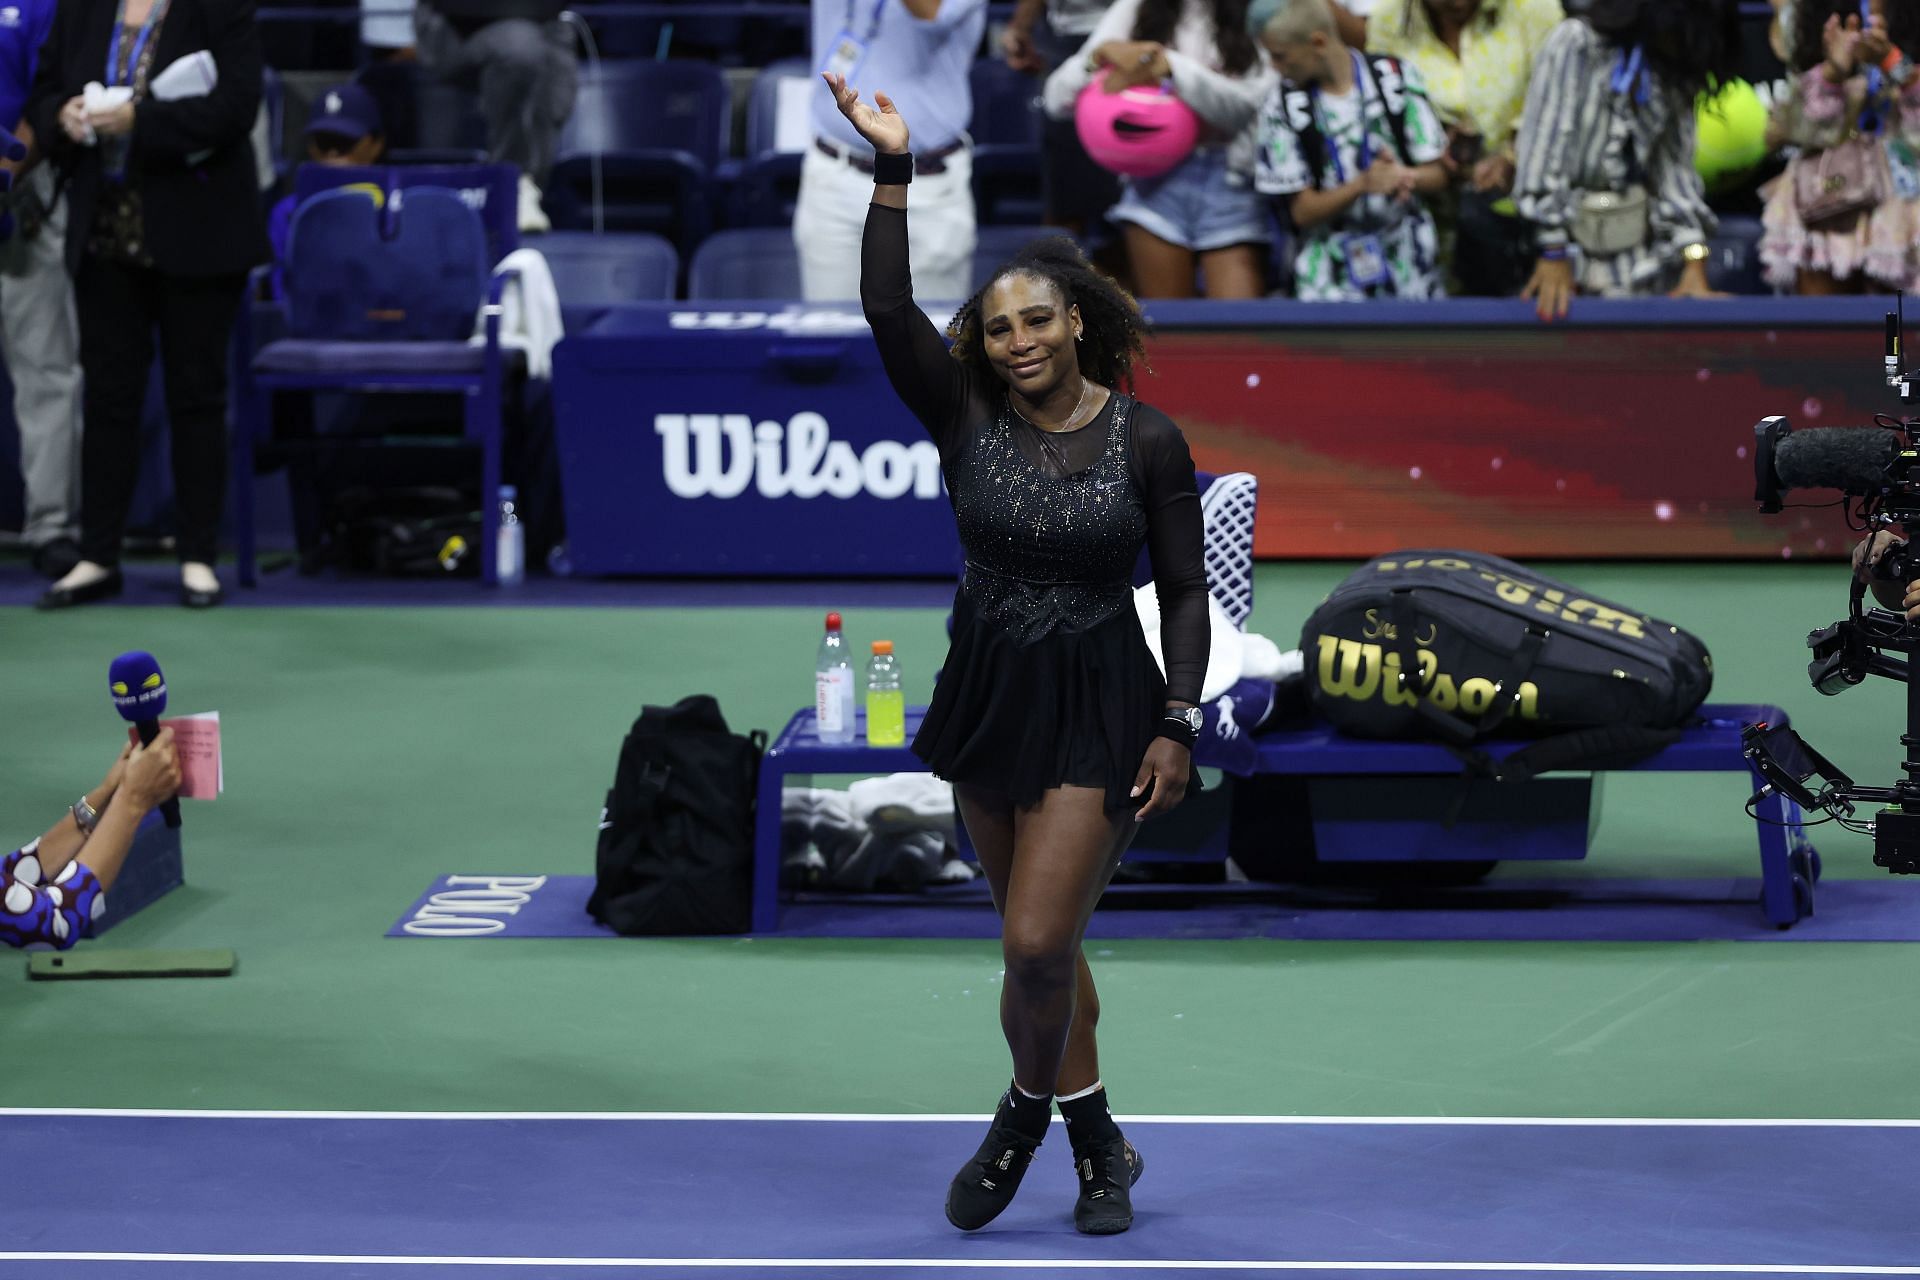 Serena Williams was last seen in action at the 2022 US Open